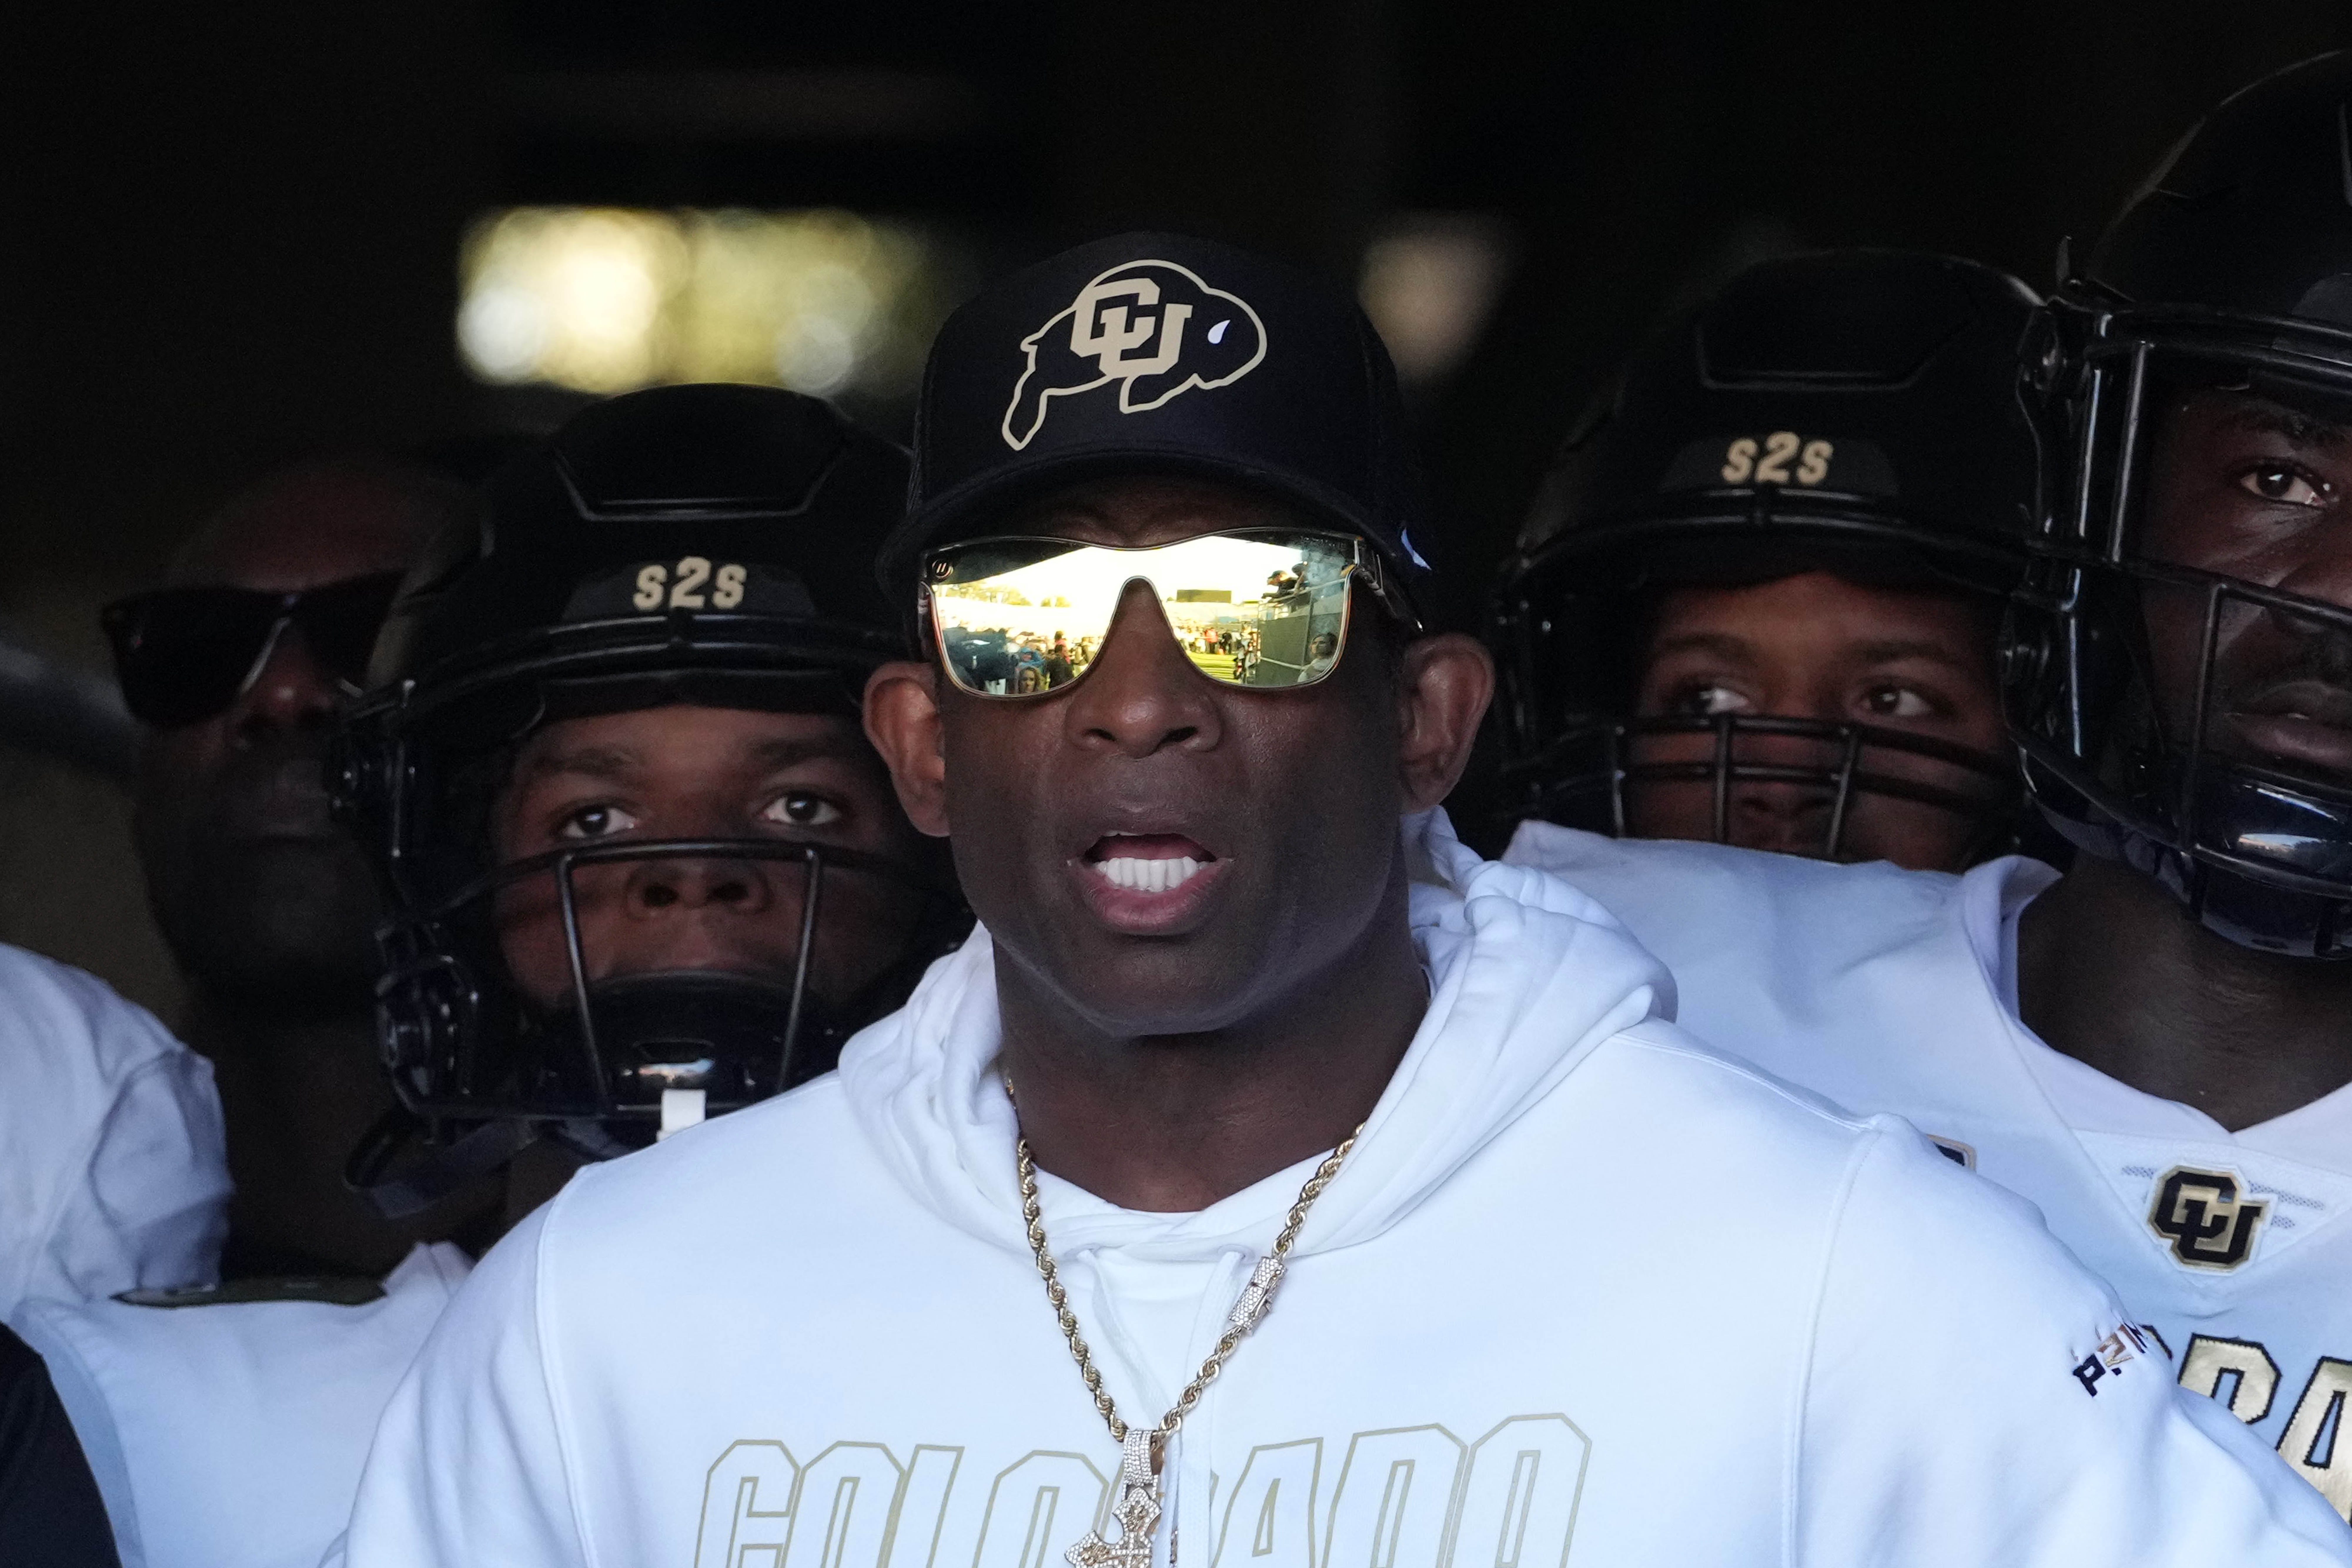 Deion Sanders suggests that top Colorado players could potentially decline offers from certain NFL teams